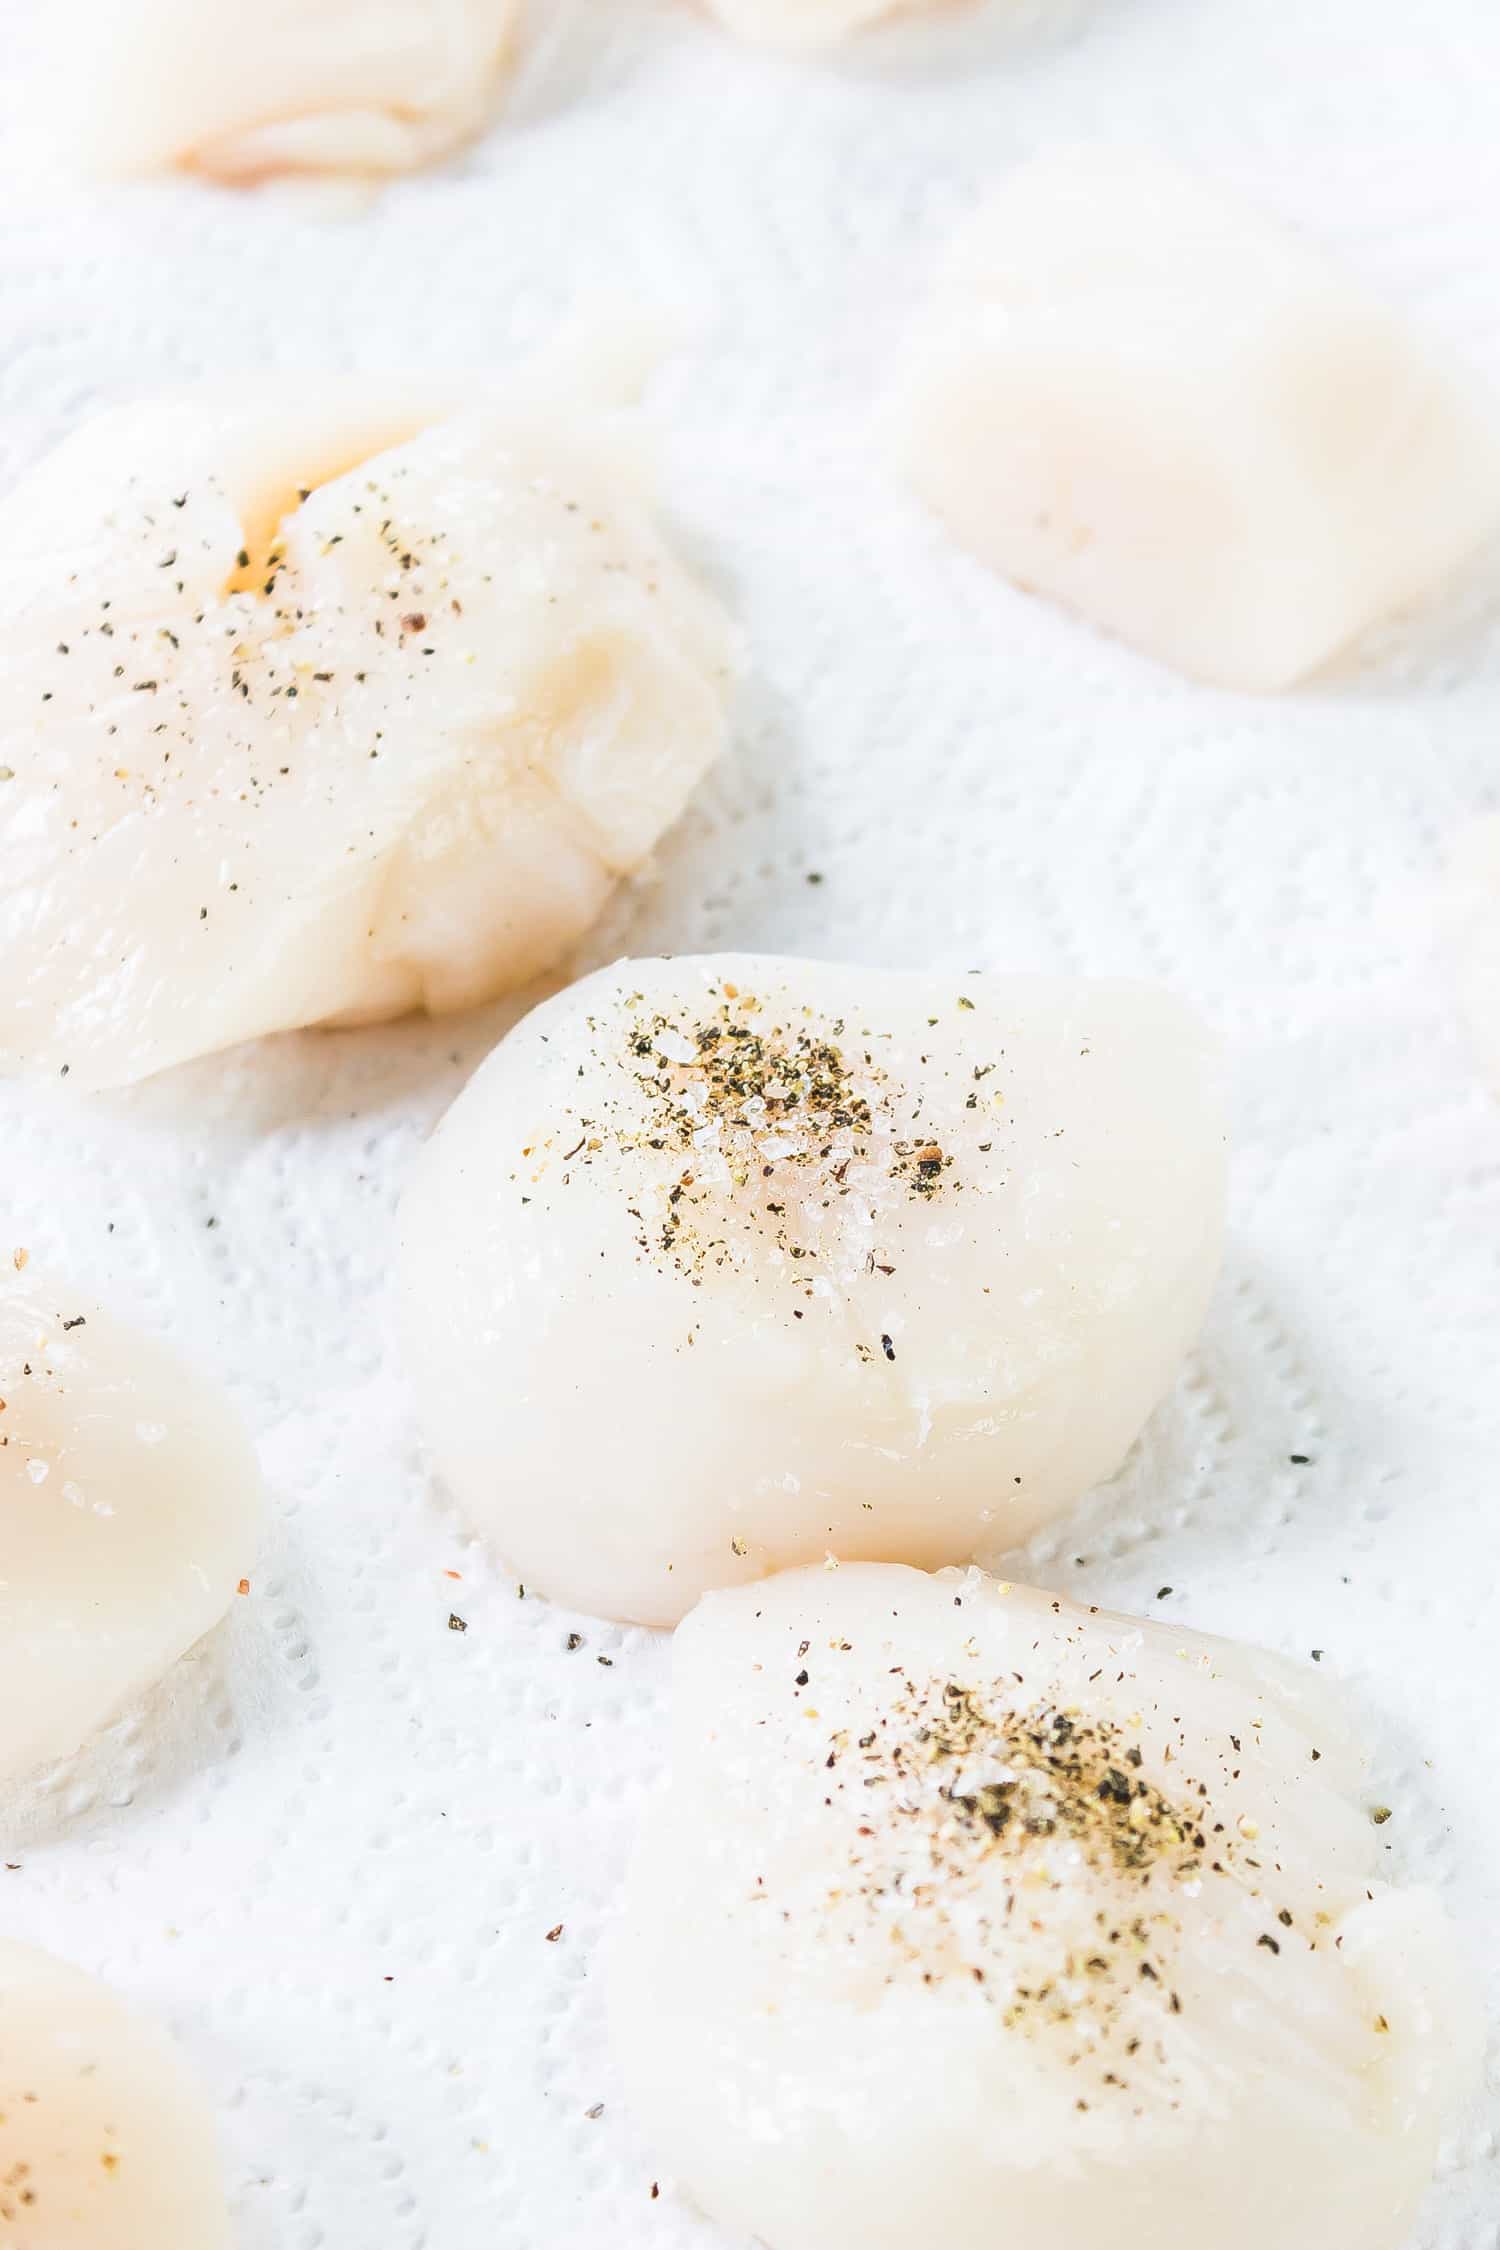 raw scallops seasoned with salt and pepper